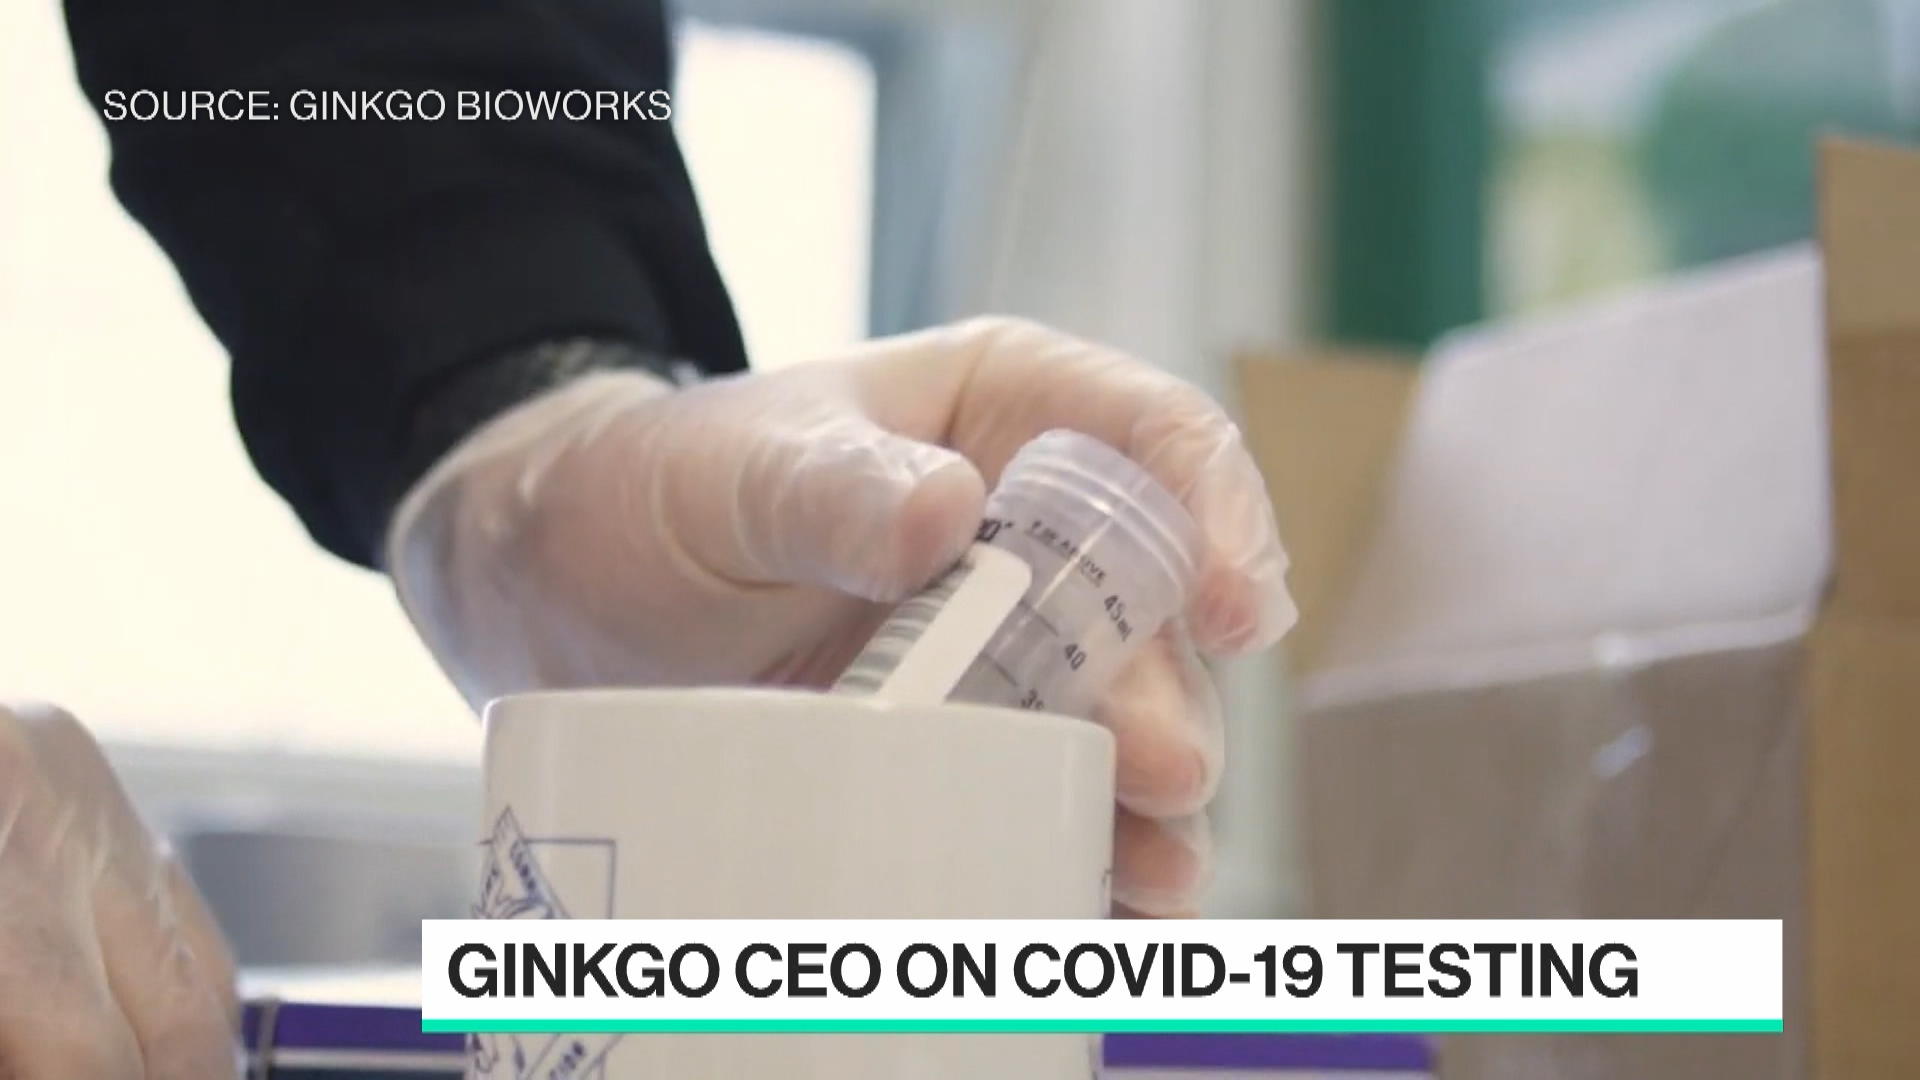 Ginkgo Bioworks is Expanding Covid Testing Business